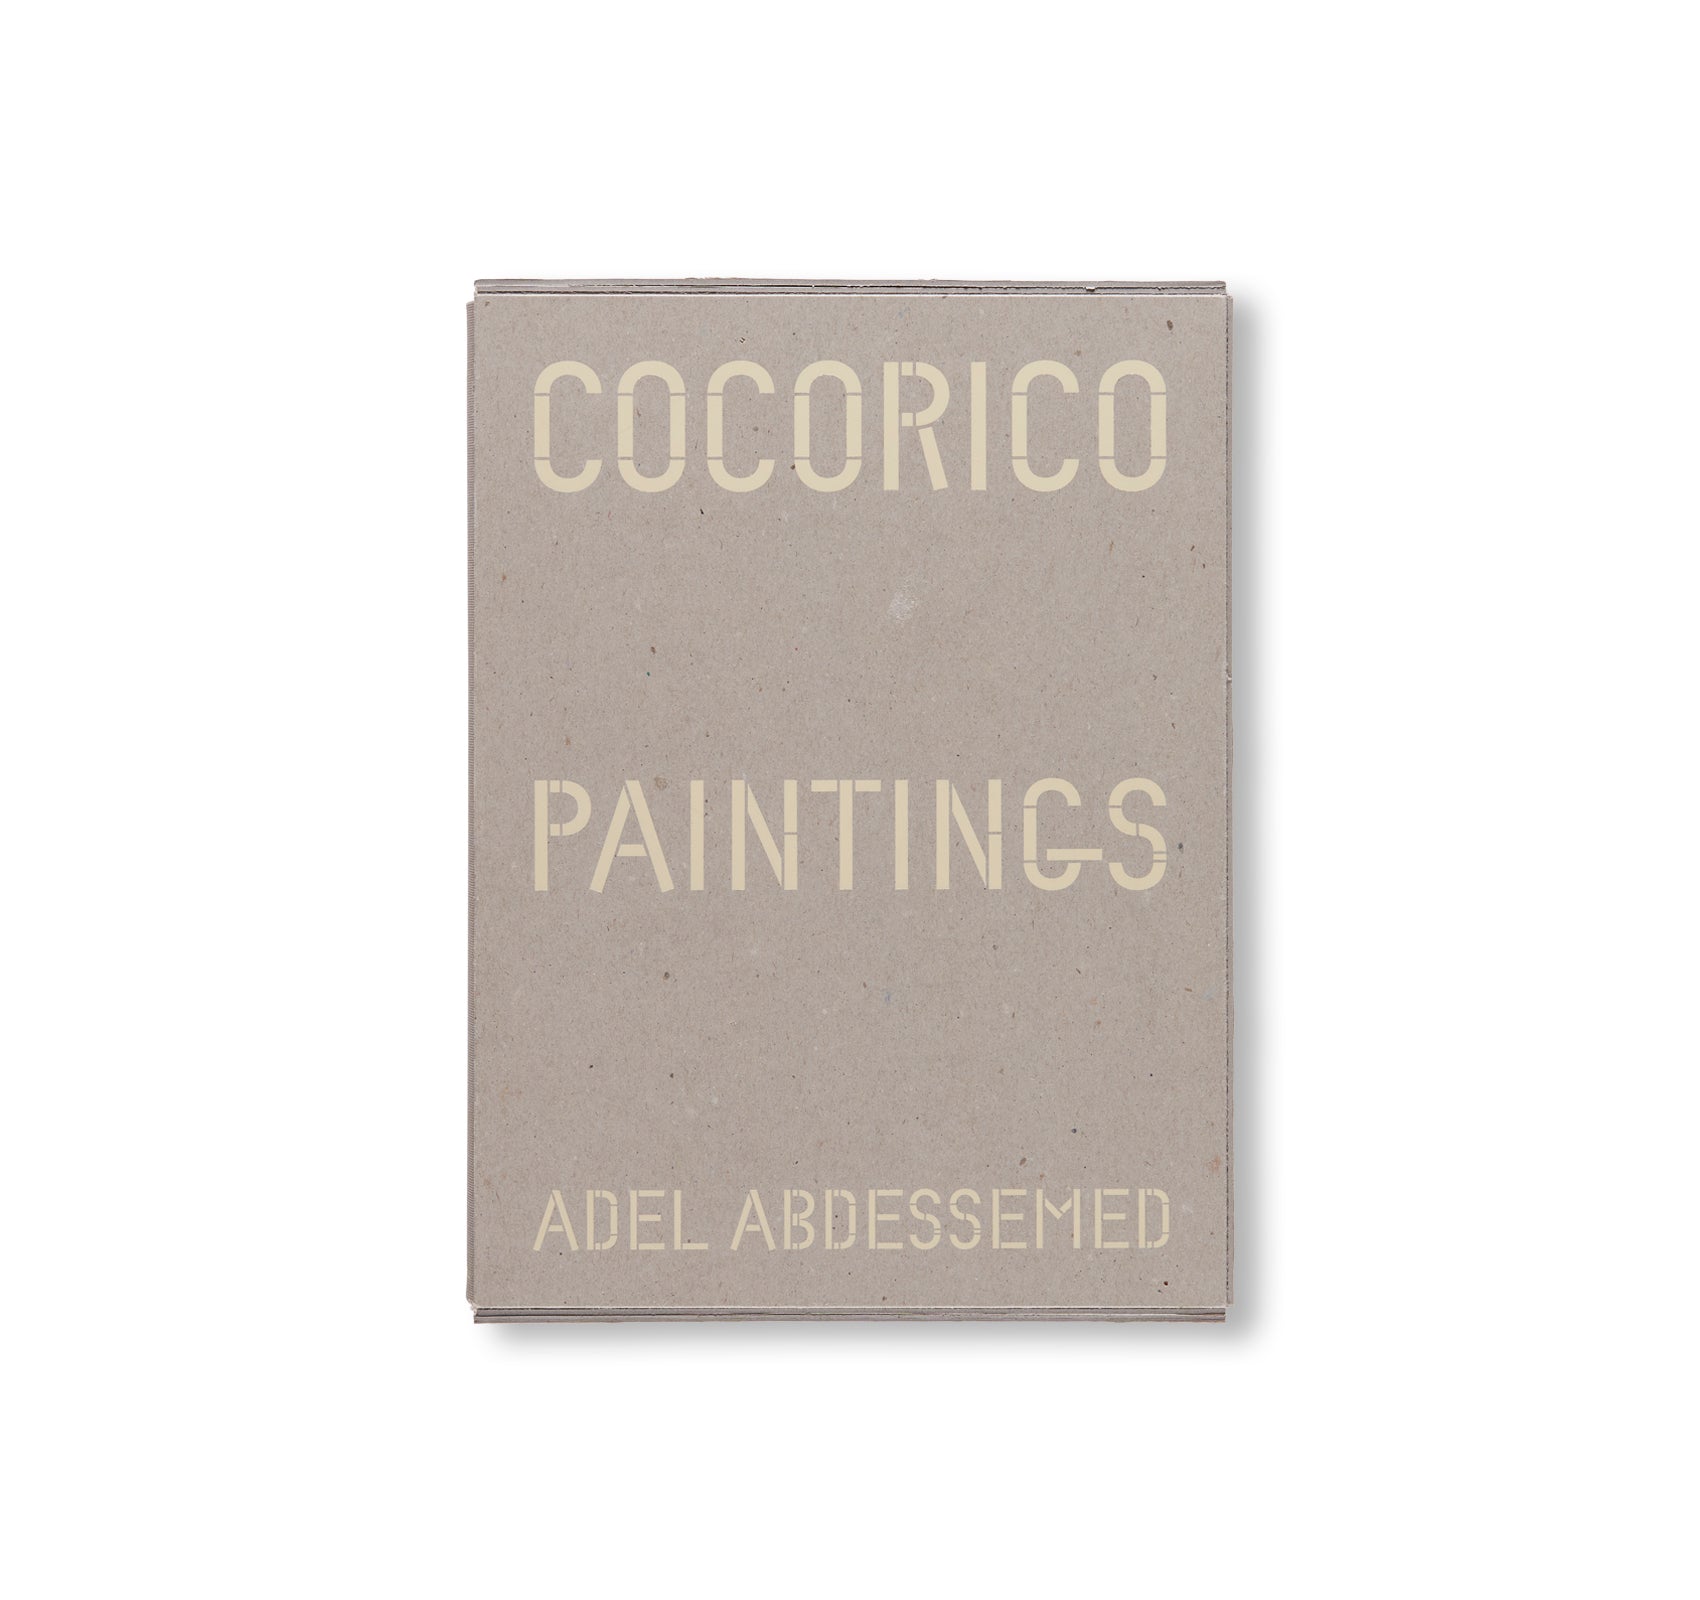 COCORICO PAINTINGS by Adel Abdessemed